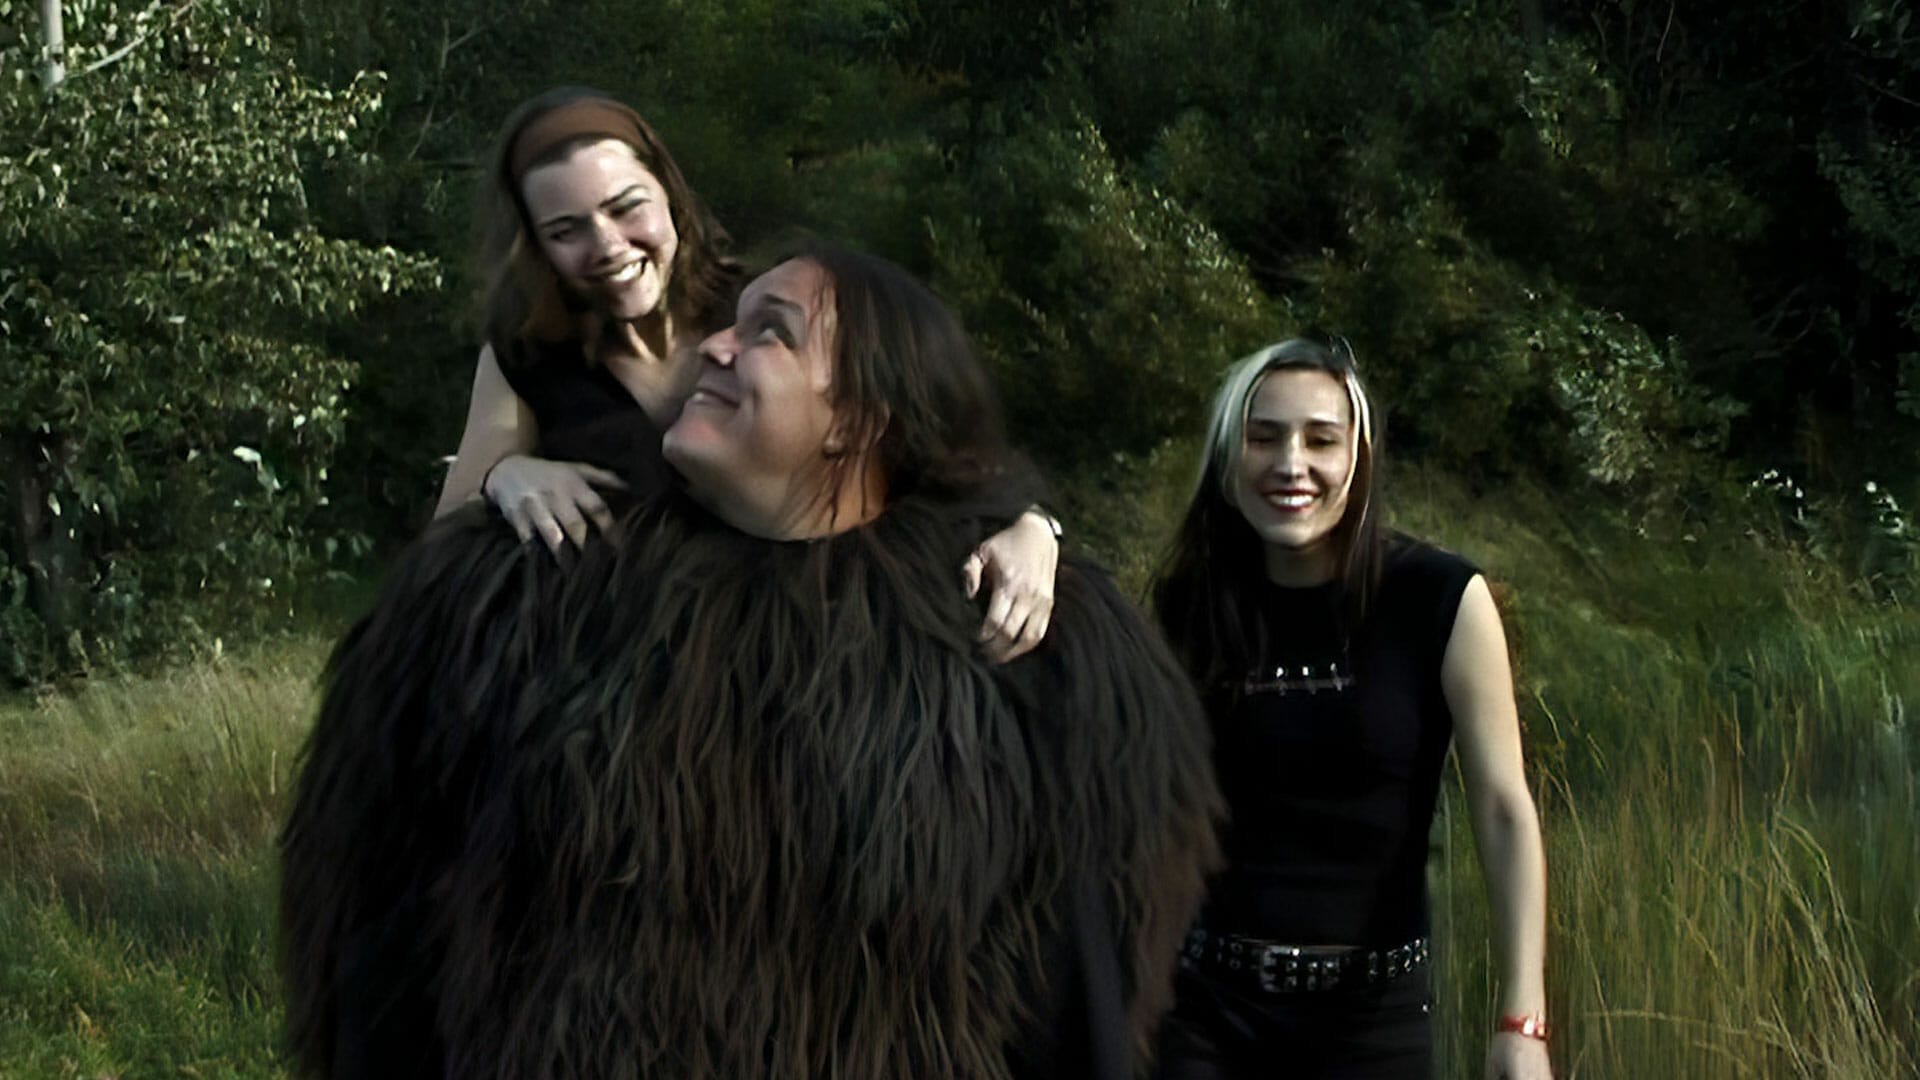 Two women standing in a field with a large furry creature in a Groovie Ghoulies music video.